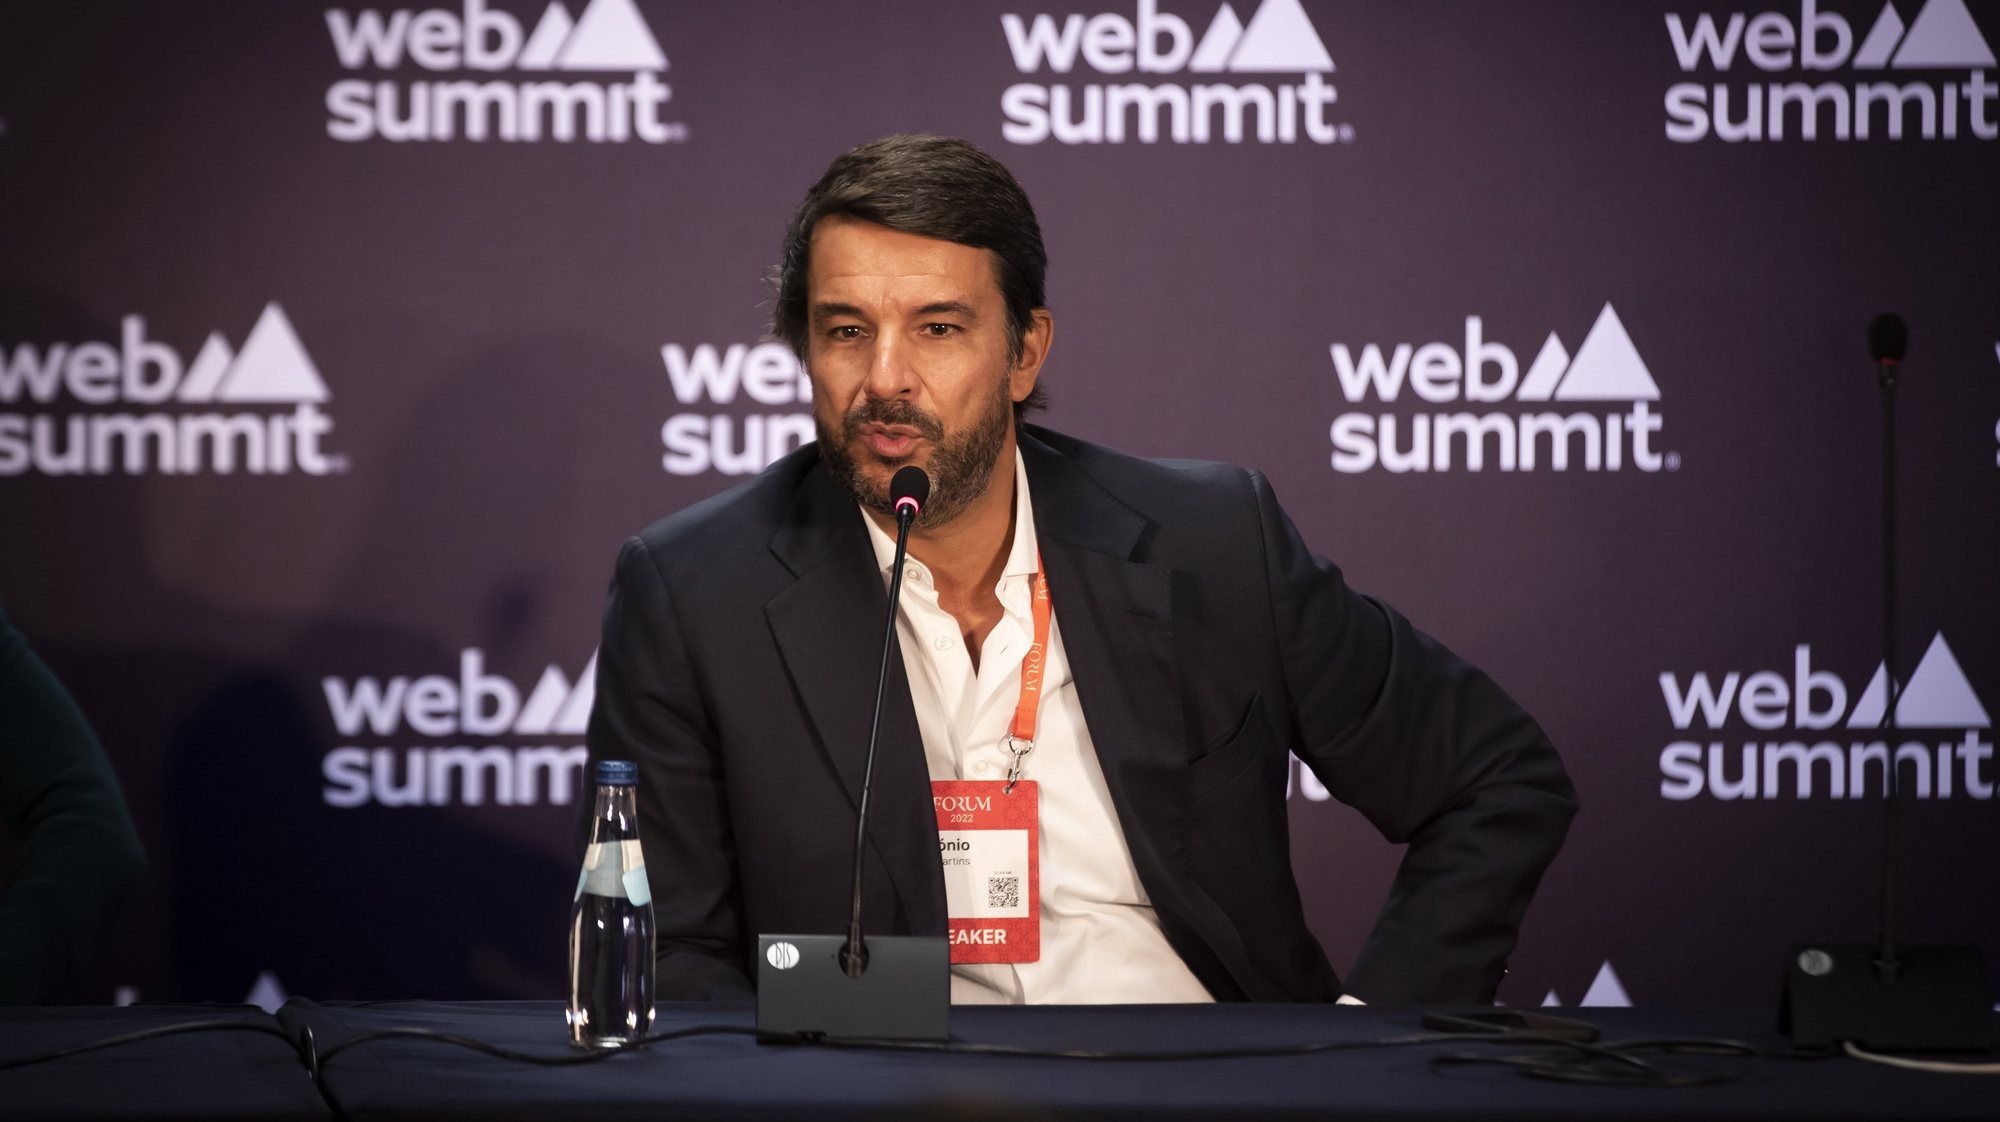 epa10285890 The CEO of Startup Portugal, Antonio Dias Martins, attends a press conference at Web Summit, Parque das Nacoes, Lisbon, Portugal, 04 November 2022. The Web Summit is considered the largest event of startups and technological entrepreneurship in the world, and takes place from 01 to 04 November in Lisbon.  EPA/JOSE SENA GOULAO